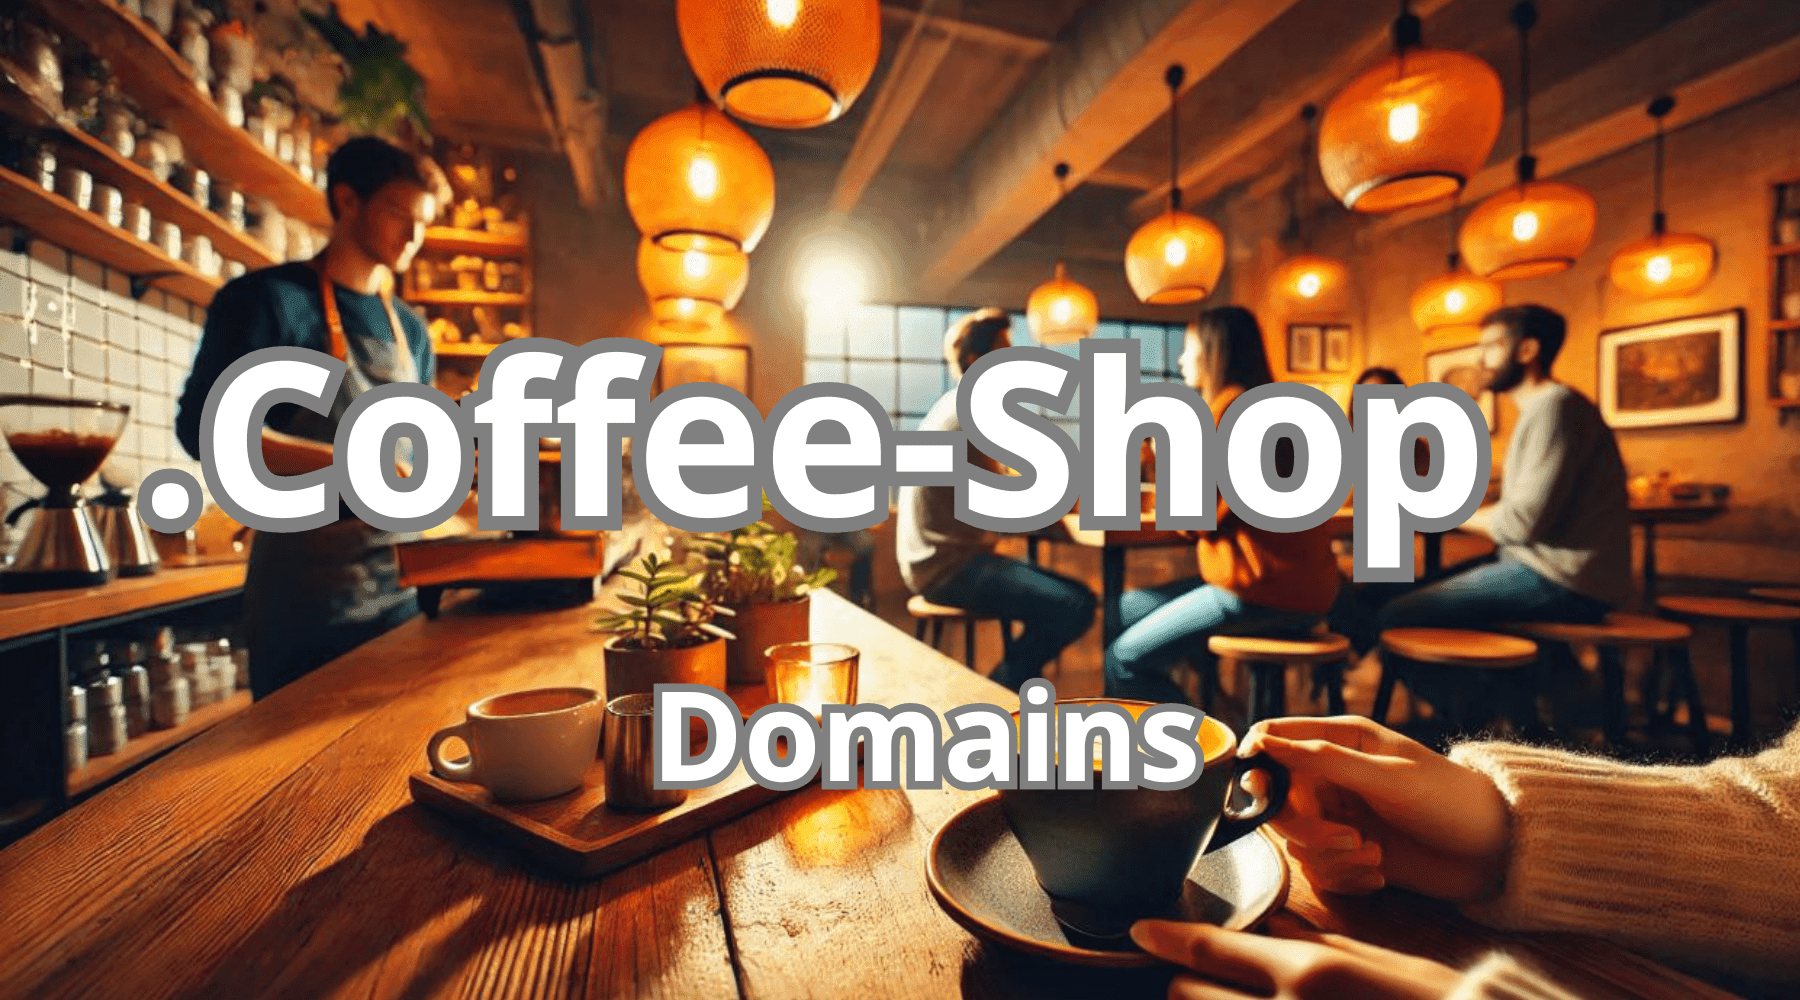 coffee-shop background image